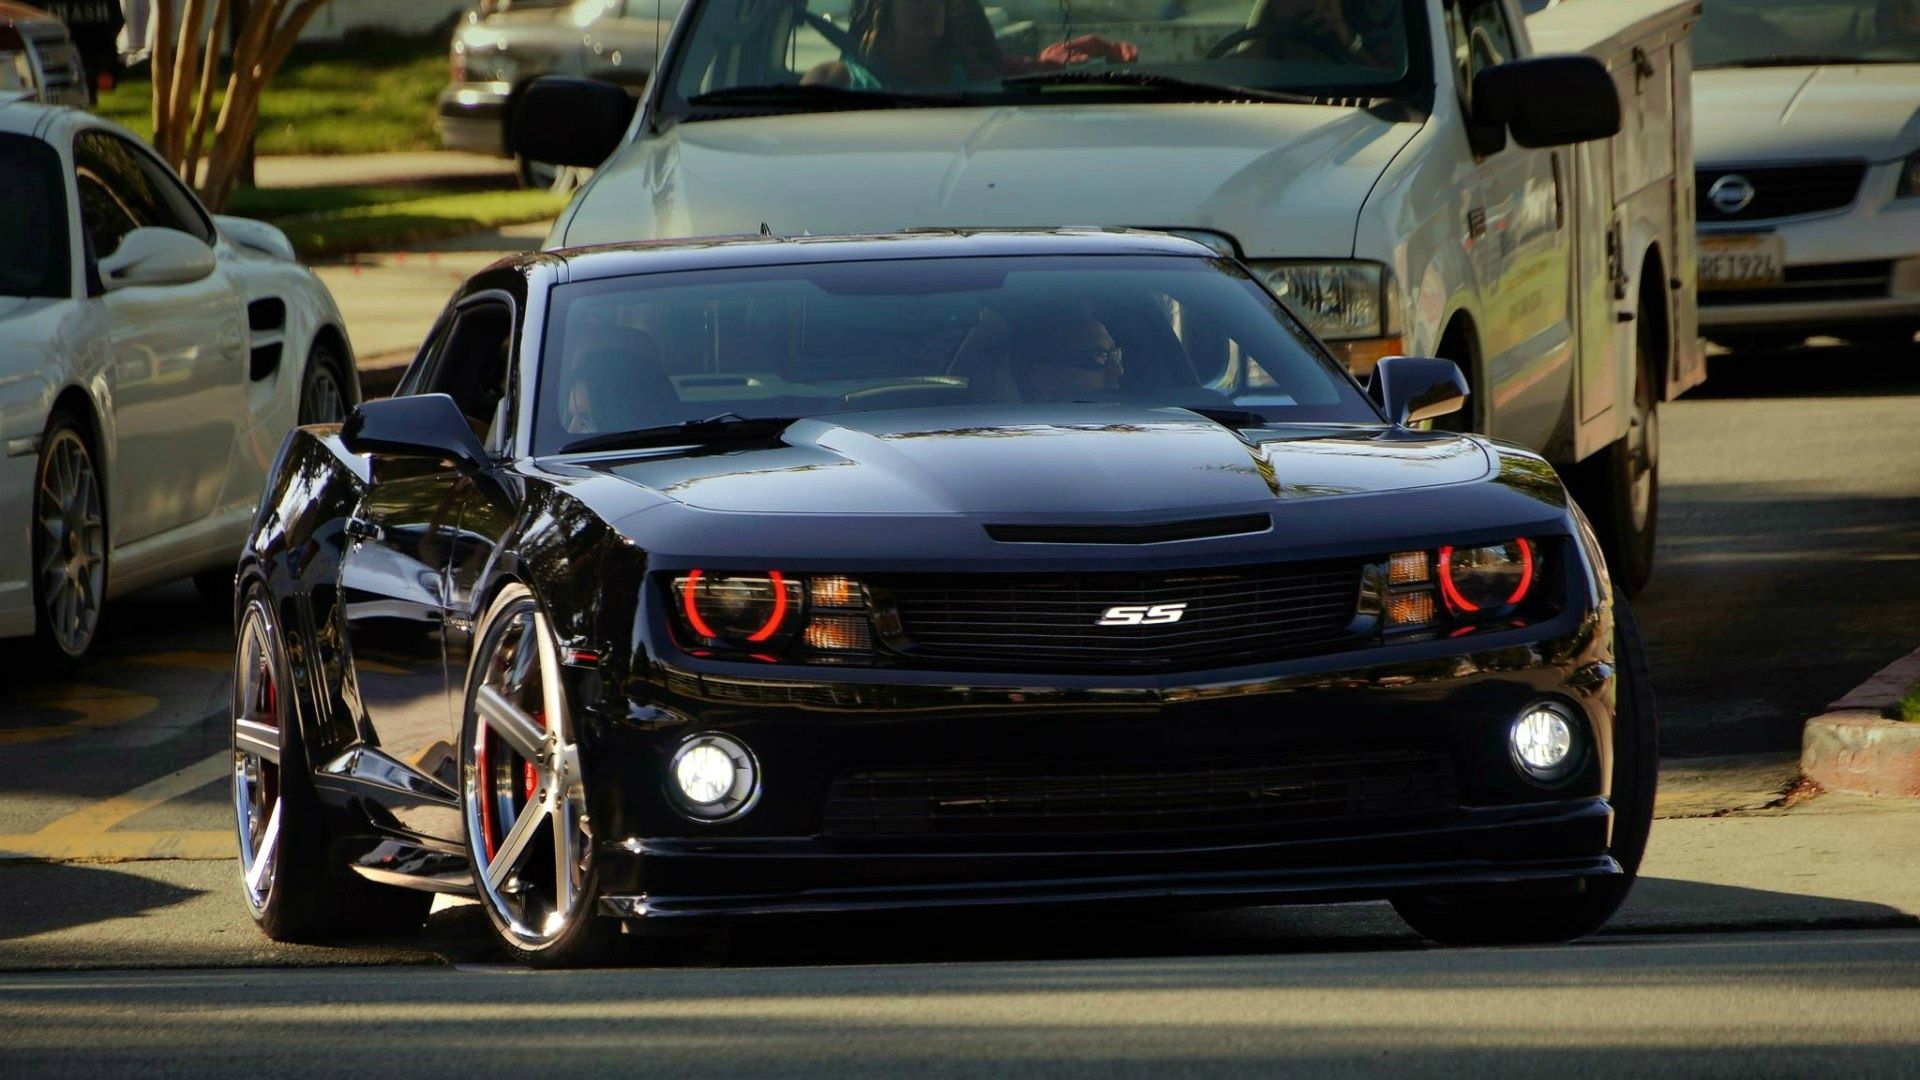 Free Images cars, camaro, ss Chevrolet